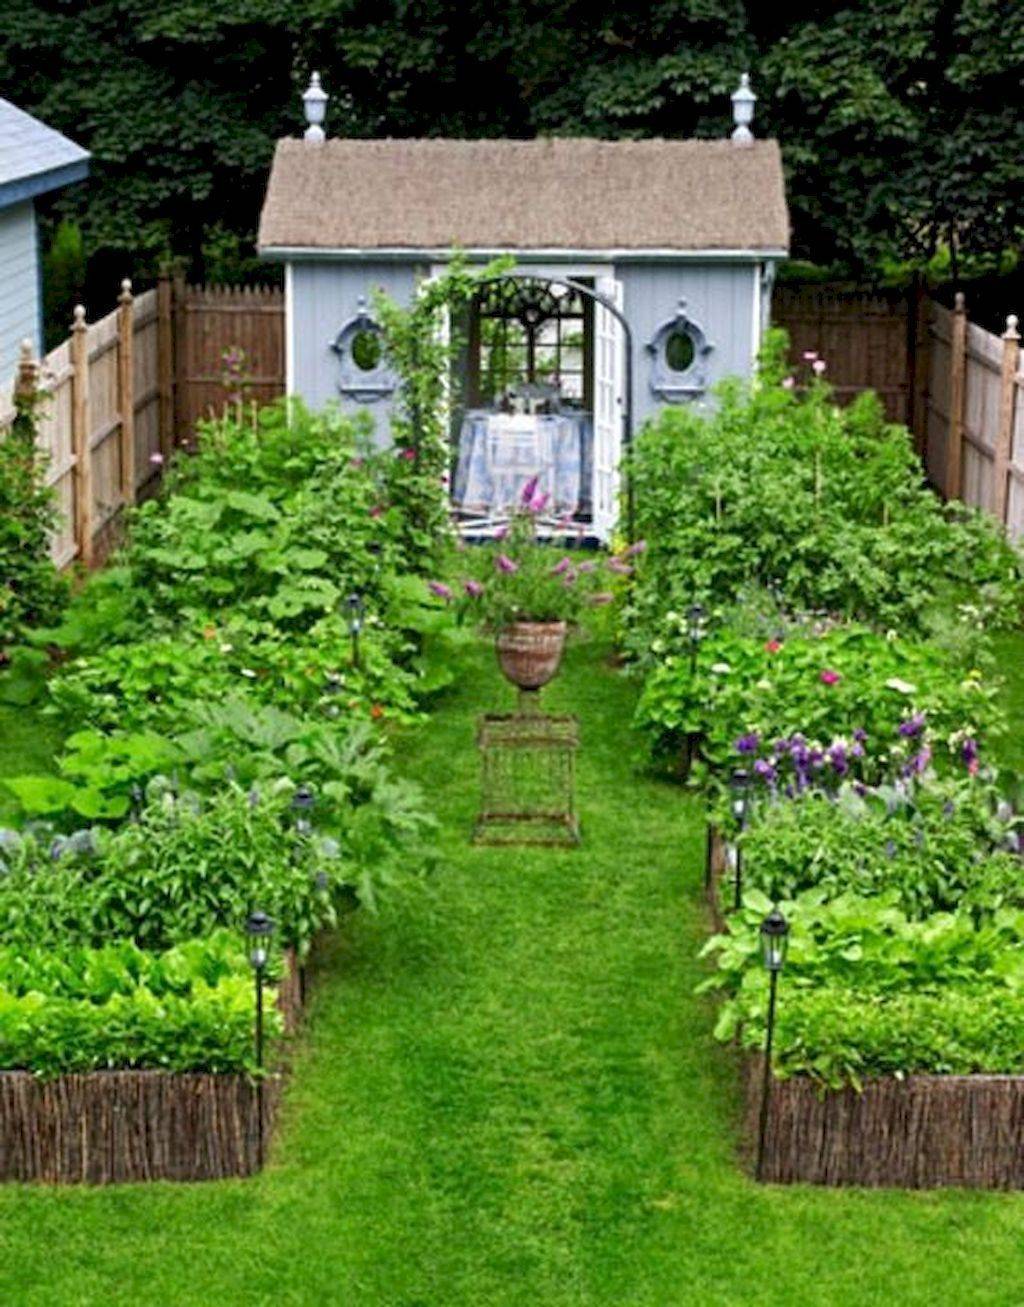 Most Productive Small Vegetable Garden Ideas